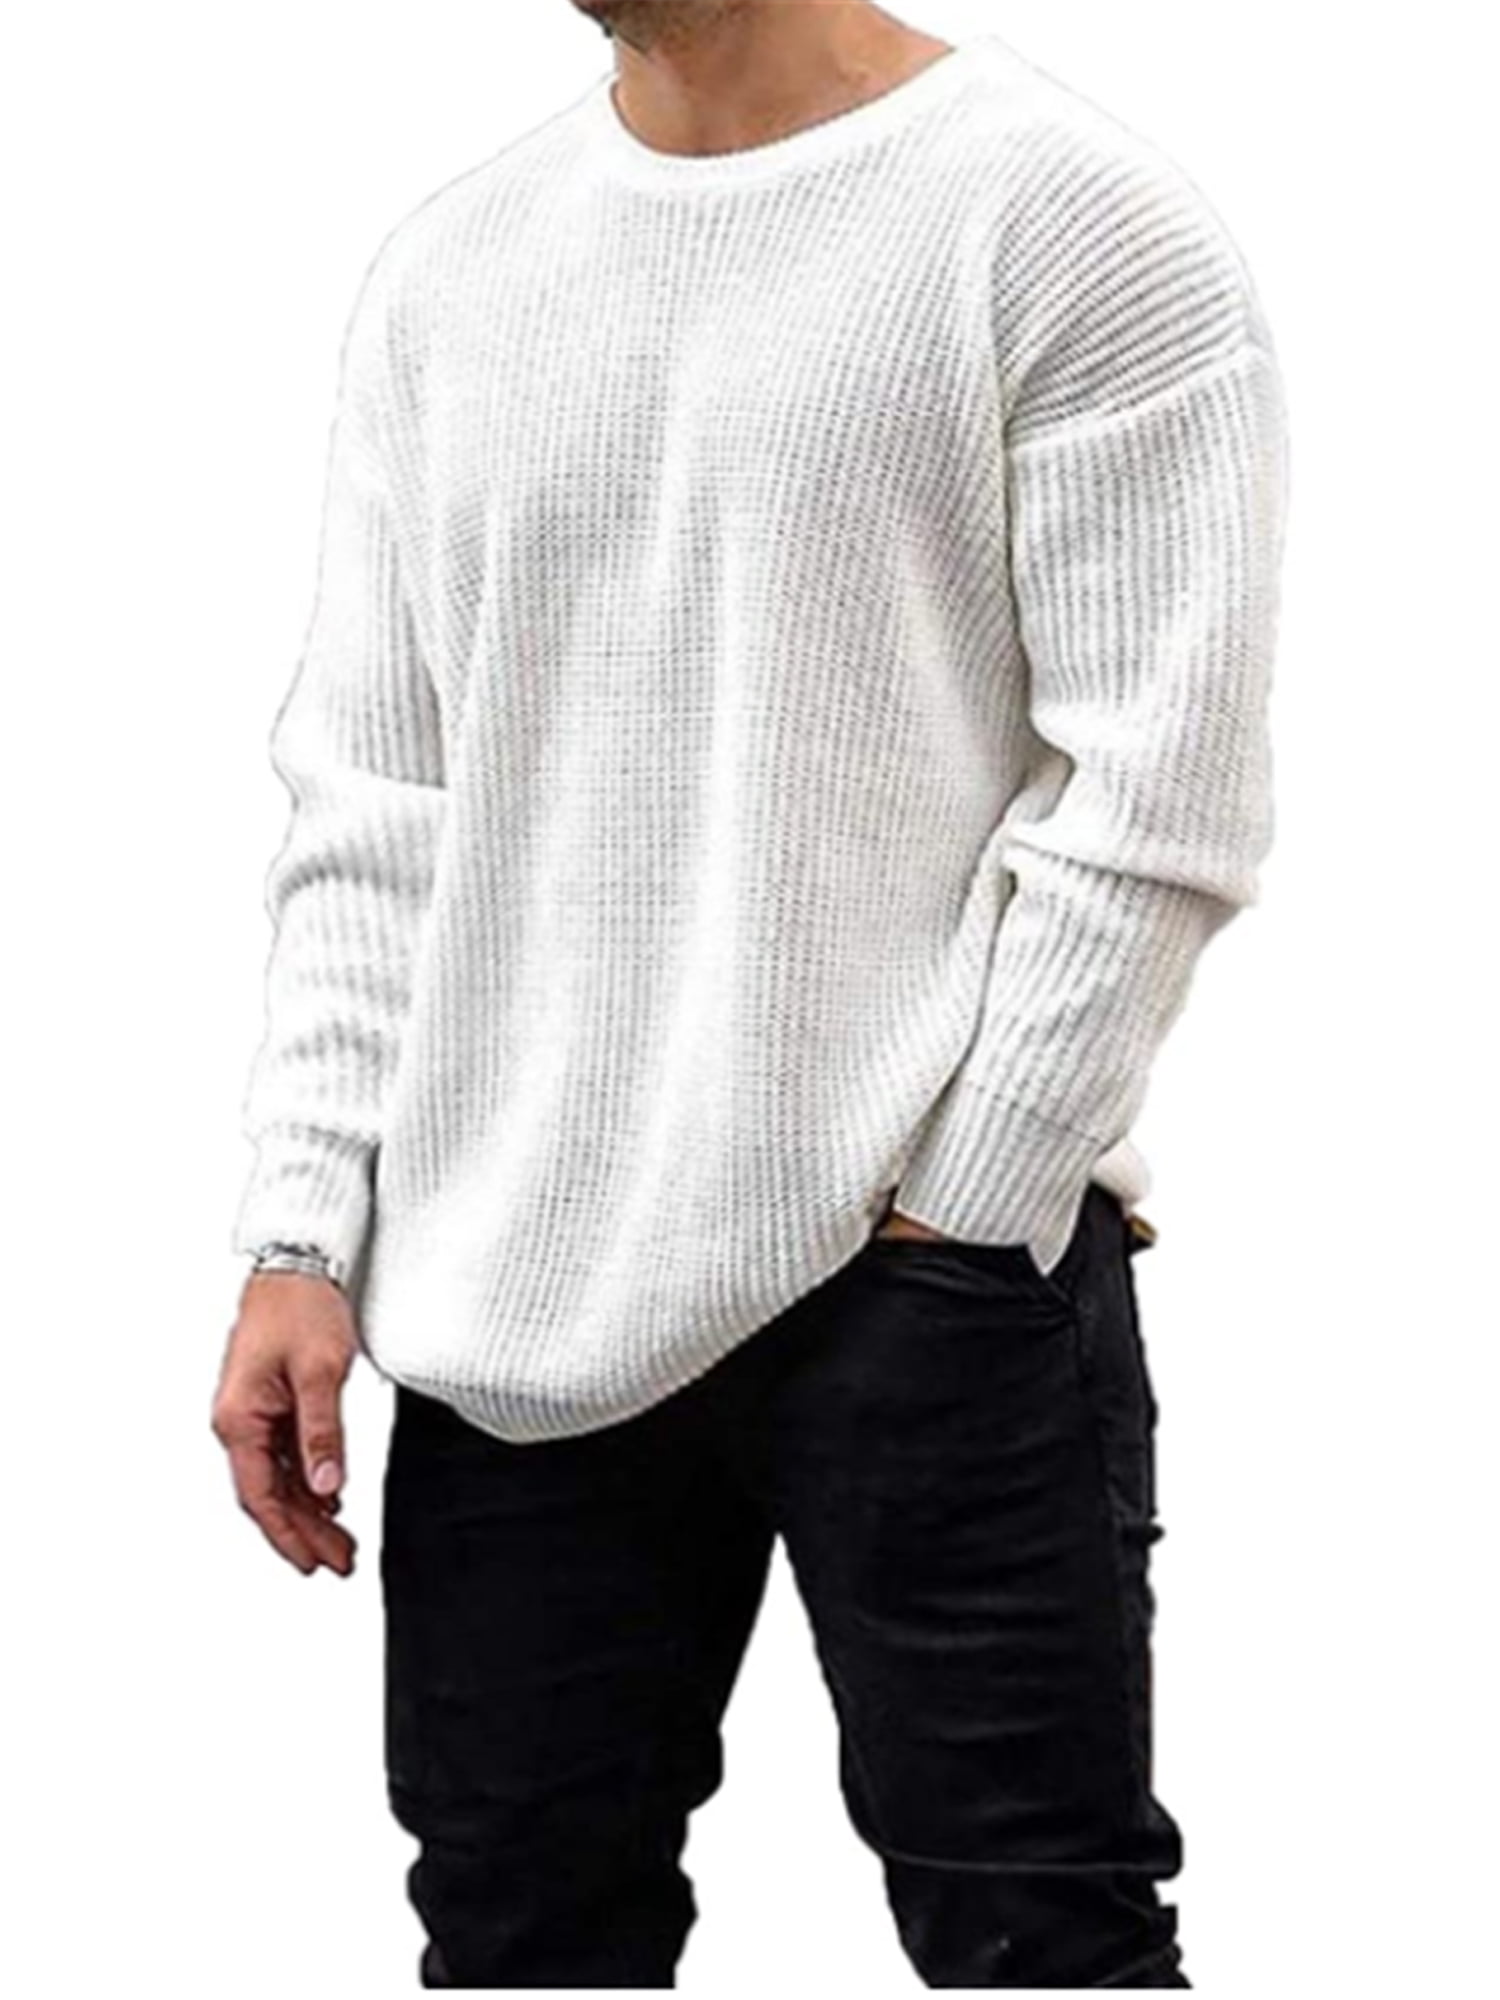 YUNY Mens Long-Sleeve Jacquard Silm Fit Knitwear Chic Soft Pullover Sweater AS7 S